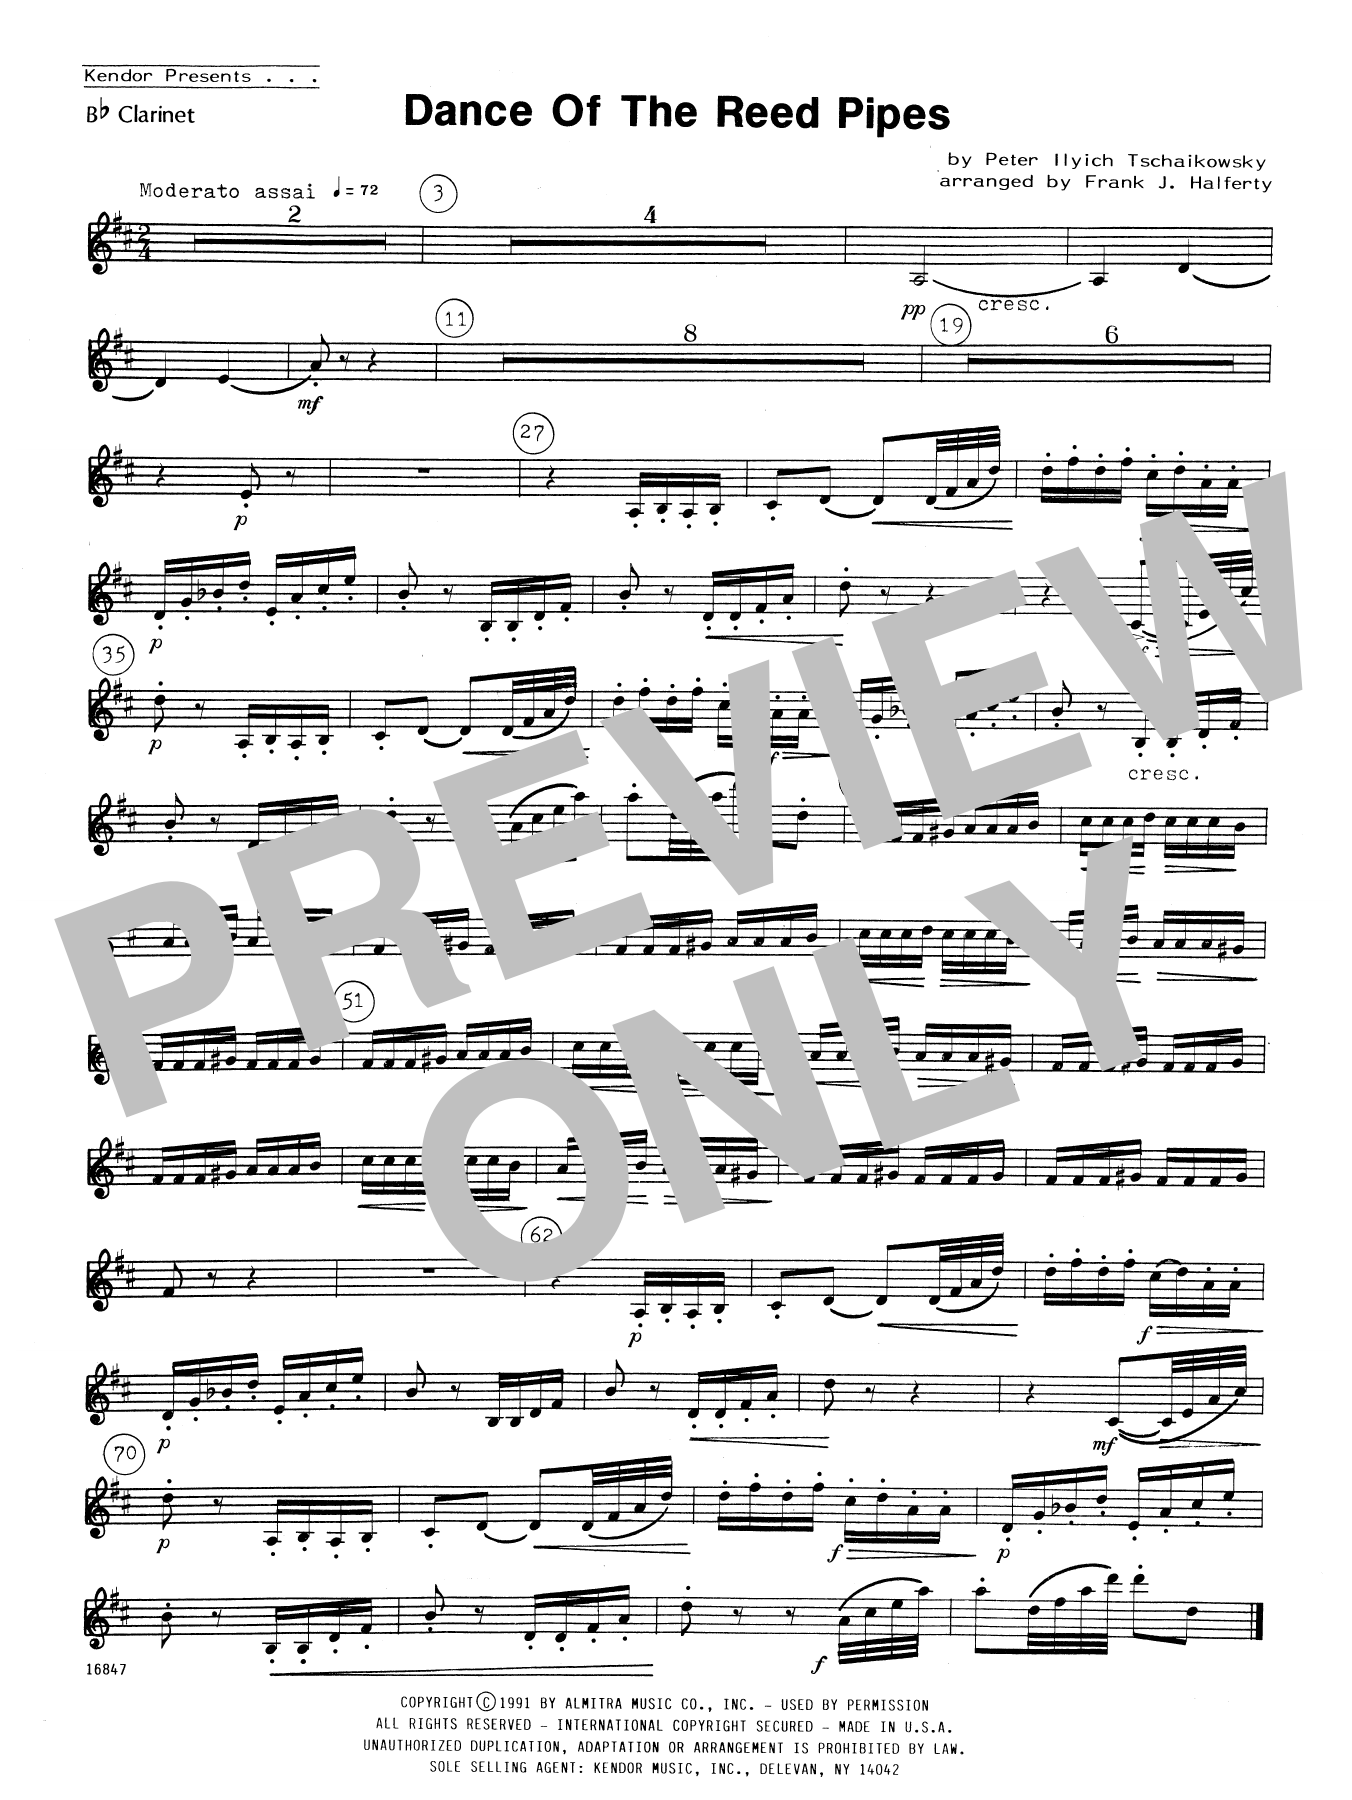 Download Frank J. Halferty Dance Of The Reed Pipes - Bb Clarinet Sheet Music